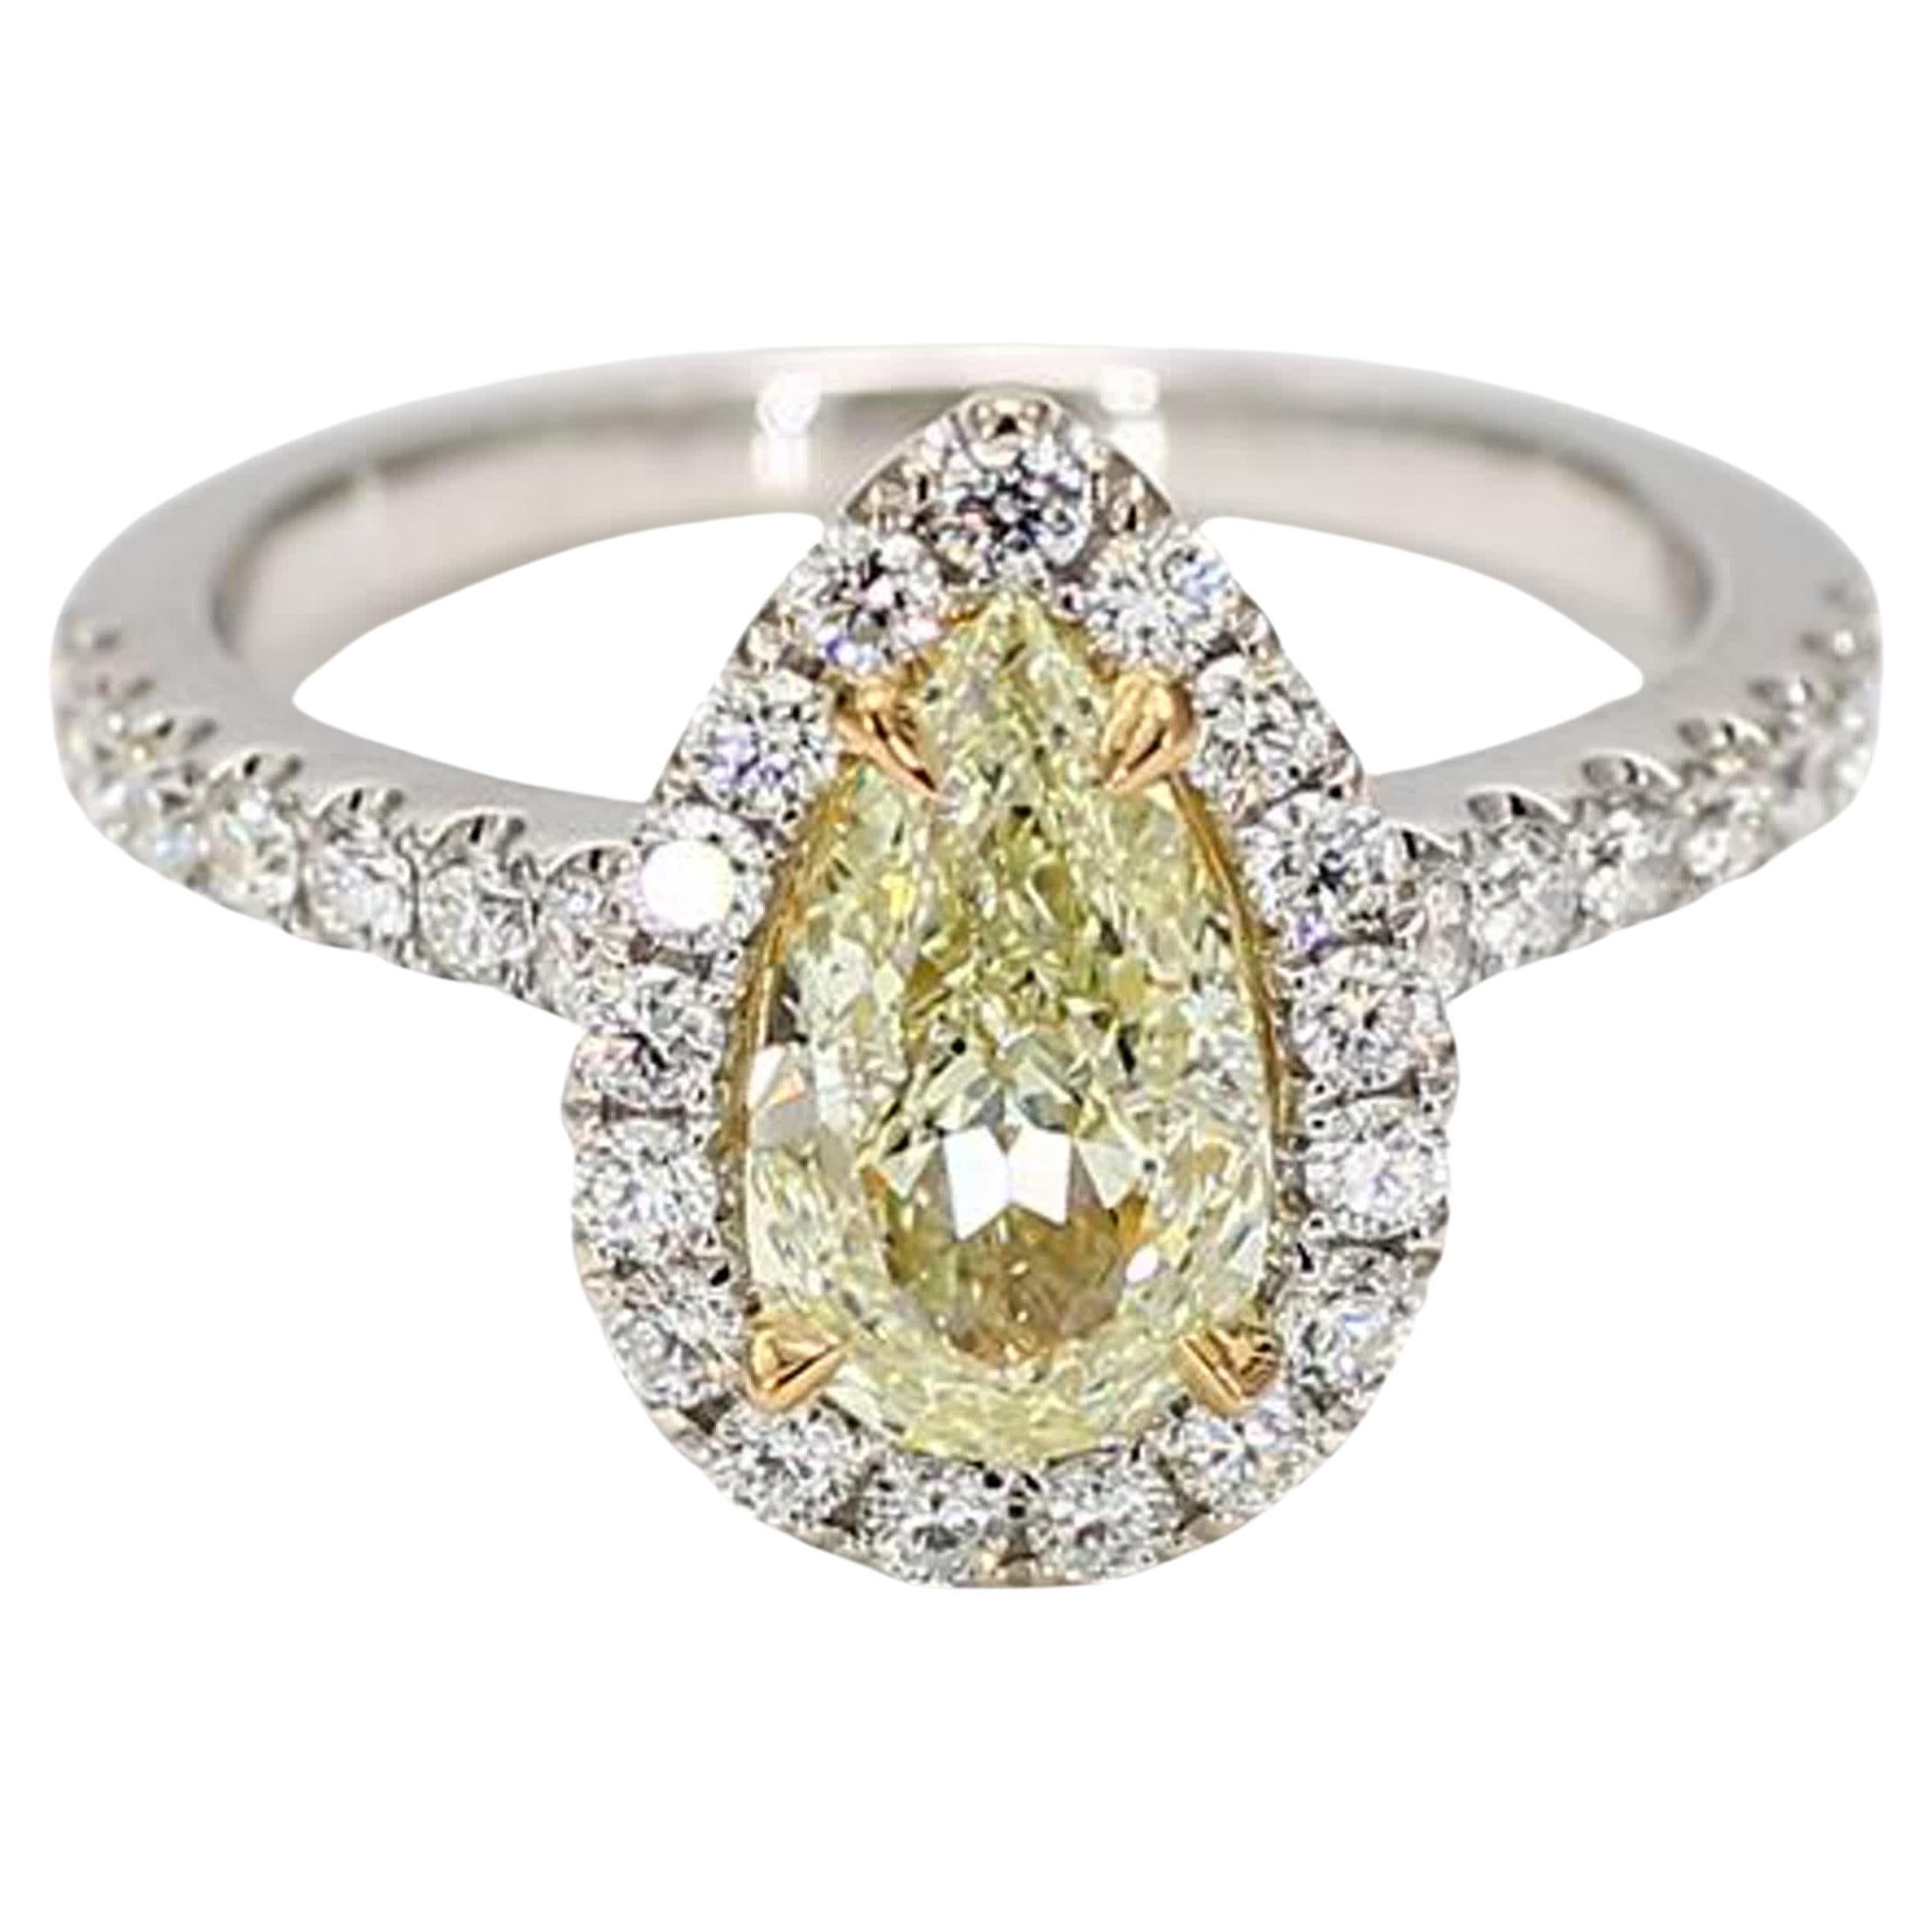 Natural Yellow Pear and White Diamond 2.18 Carat TW Gold Cocktail Ring